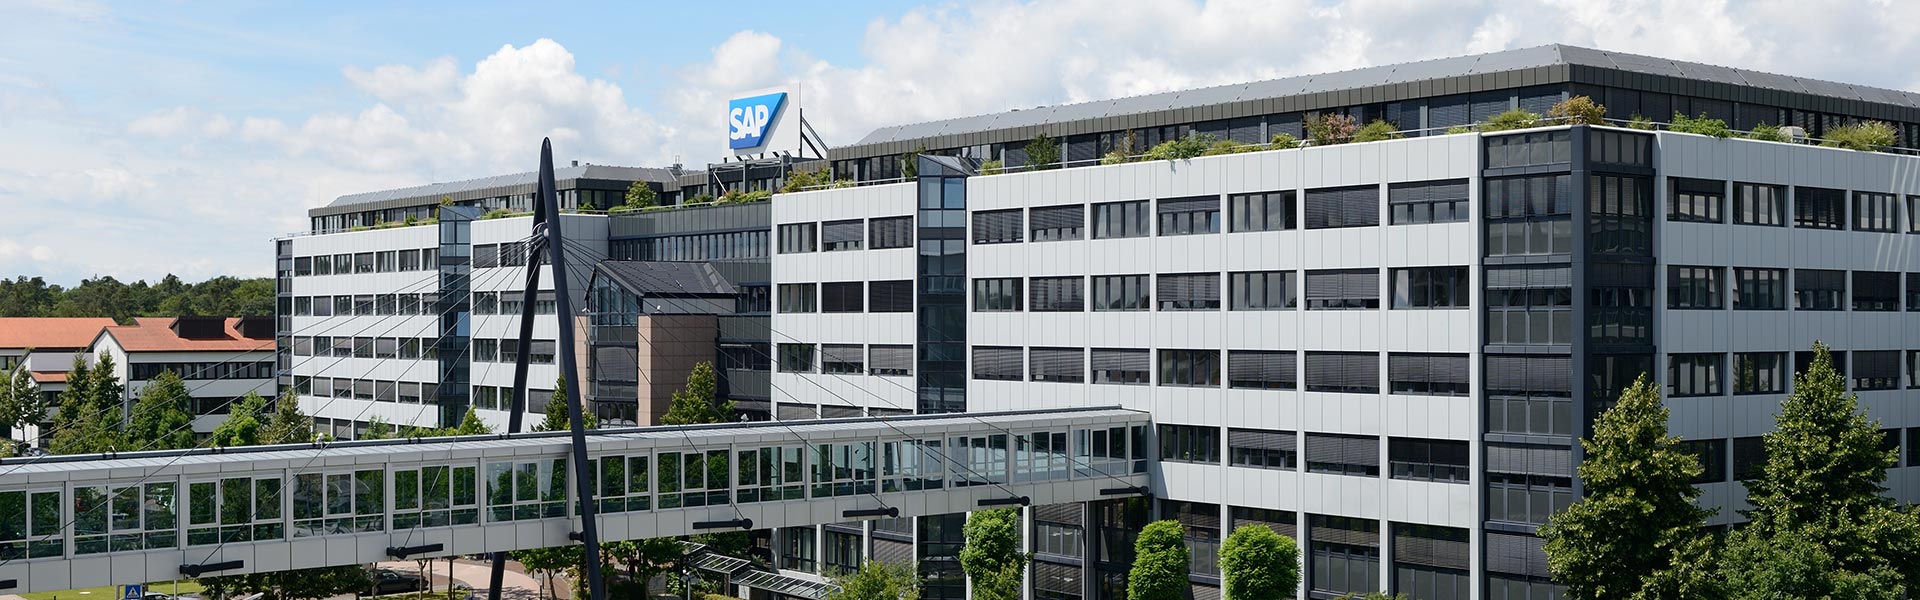 SAP Announces Third Quarter and First Nine Months 2019 Results